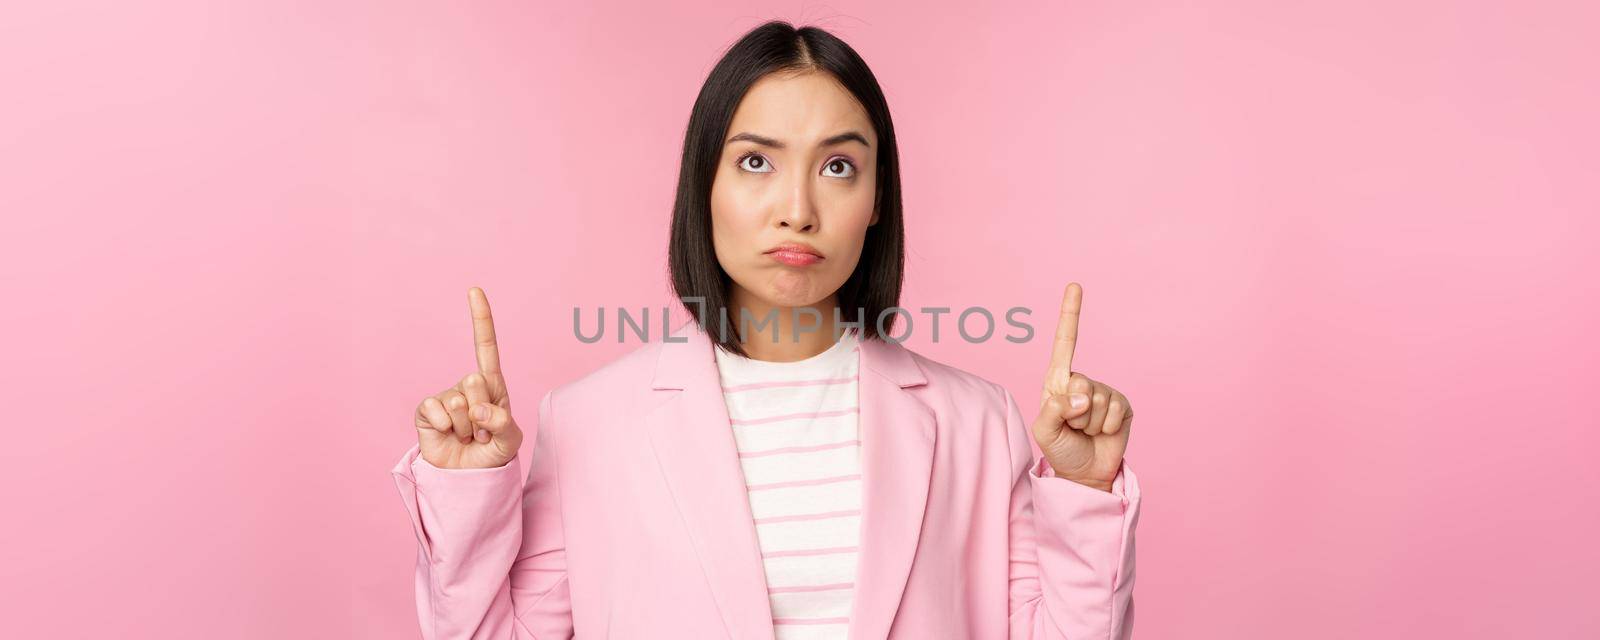 Upset asian corporate woman in office suit, pointing and looking up with disappointed face expression, standing over pink background.